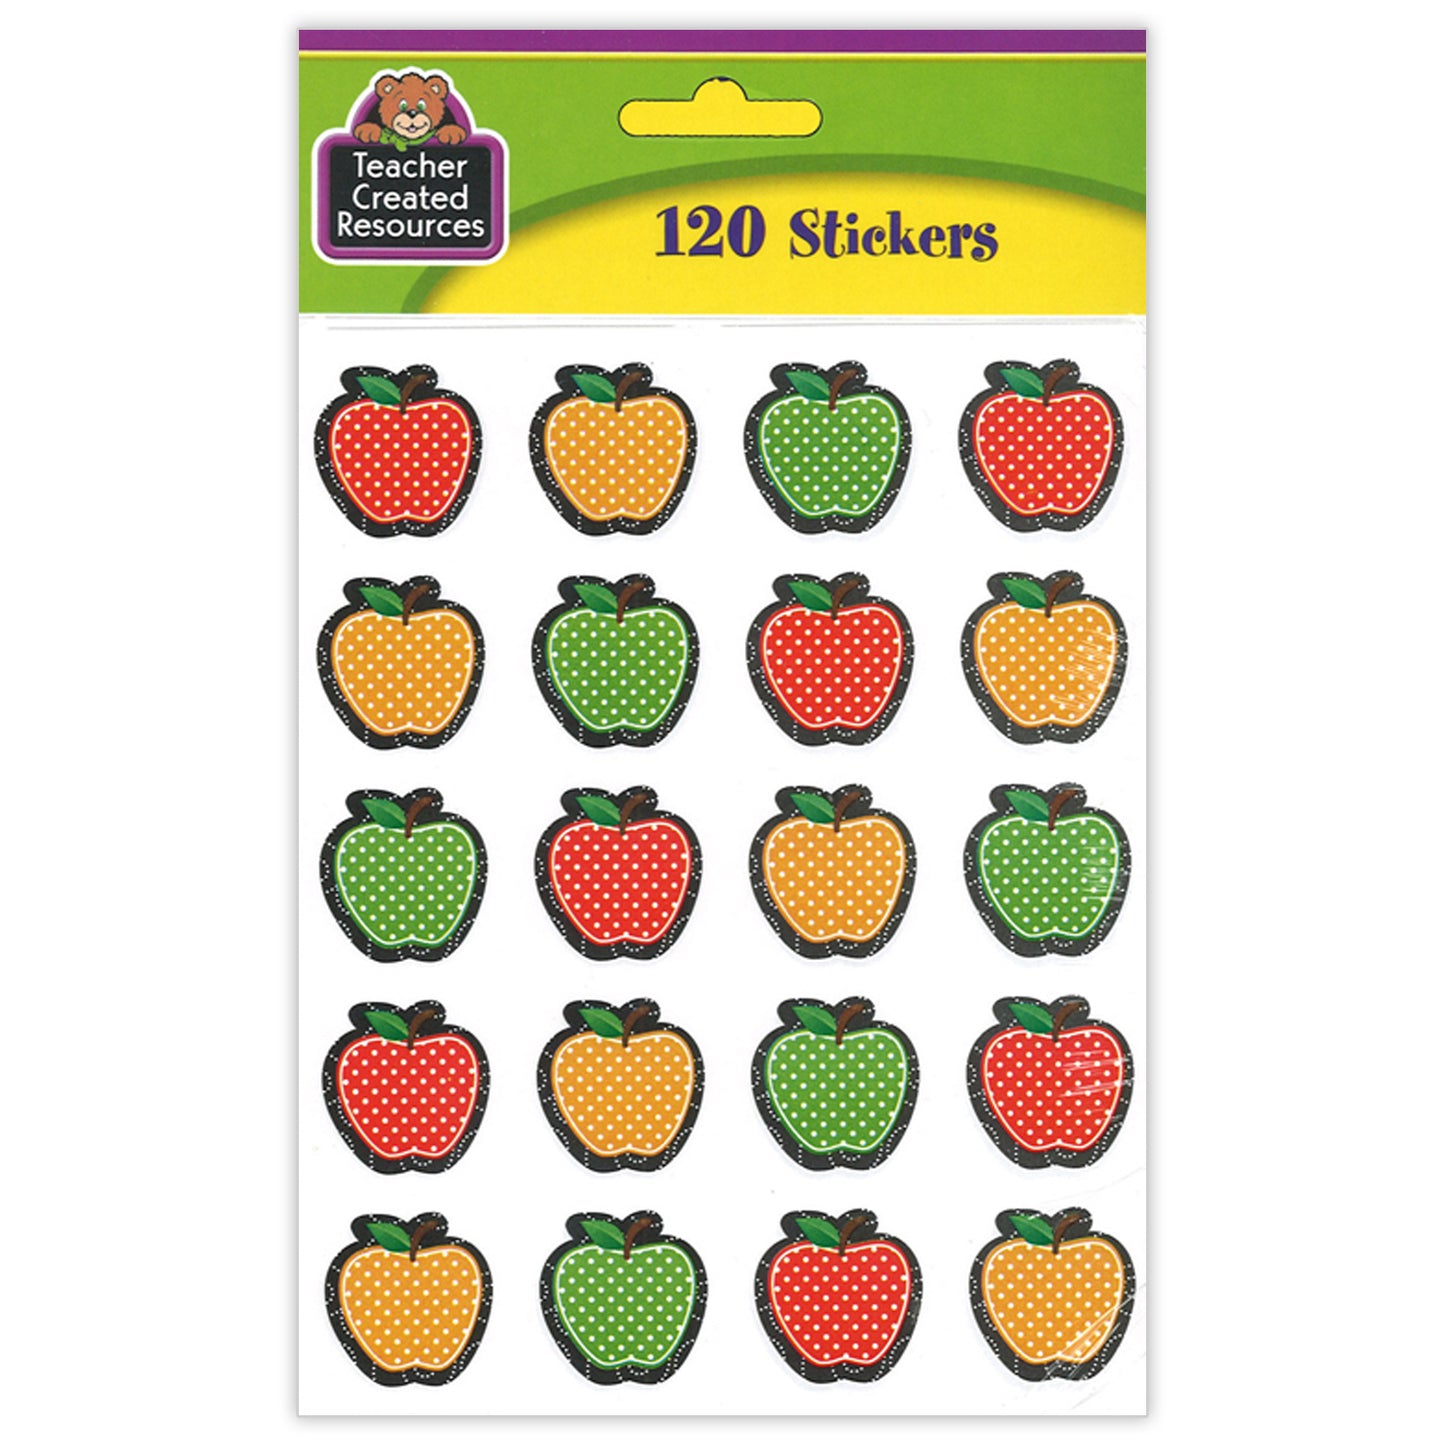 Dotty Apples Stickers, 120 Per Pack, 12 Packs